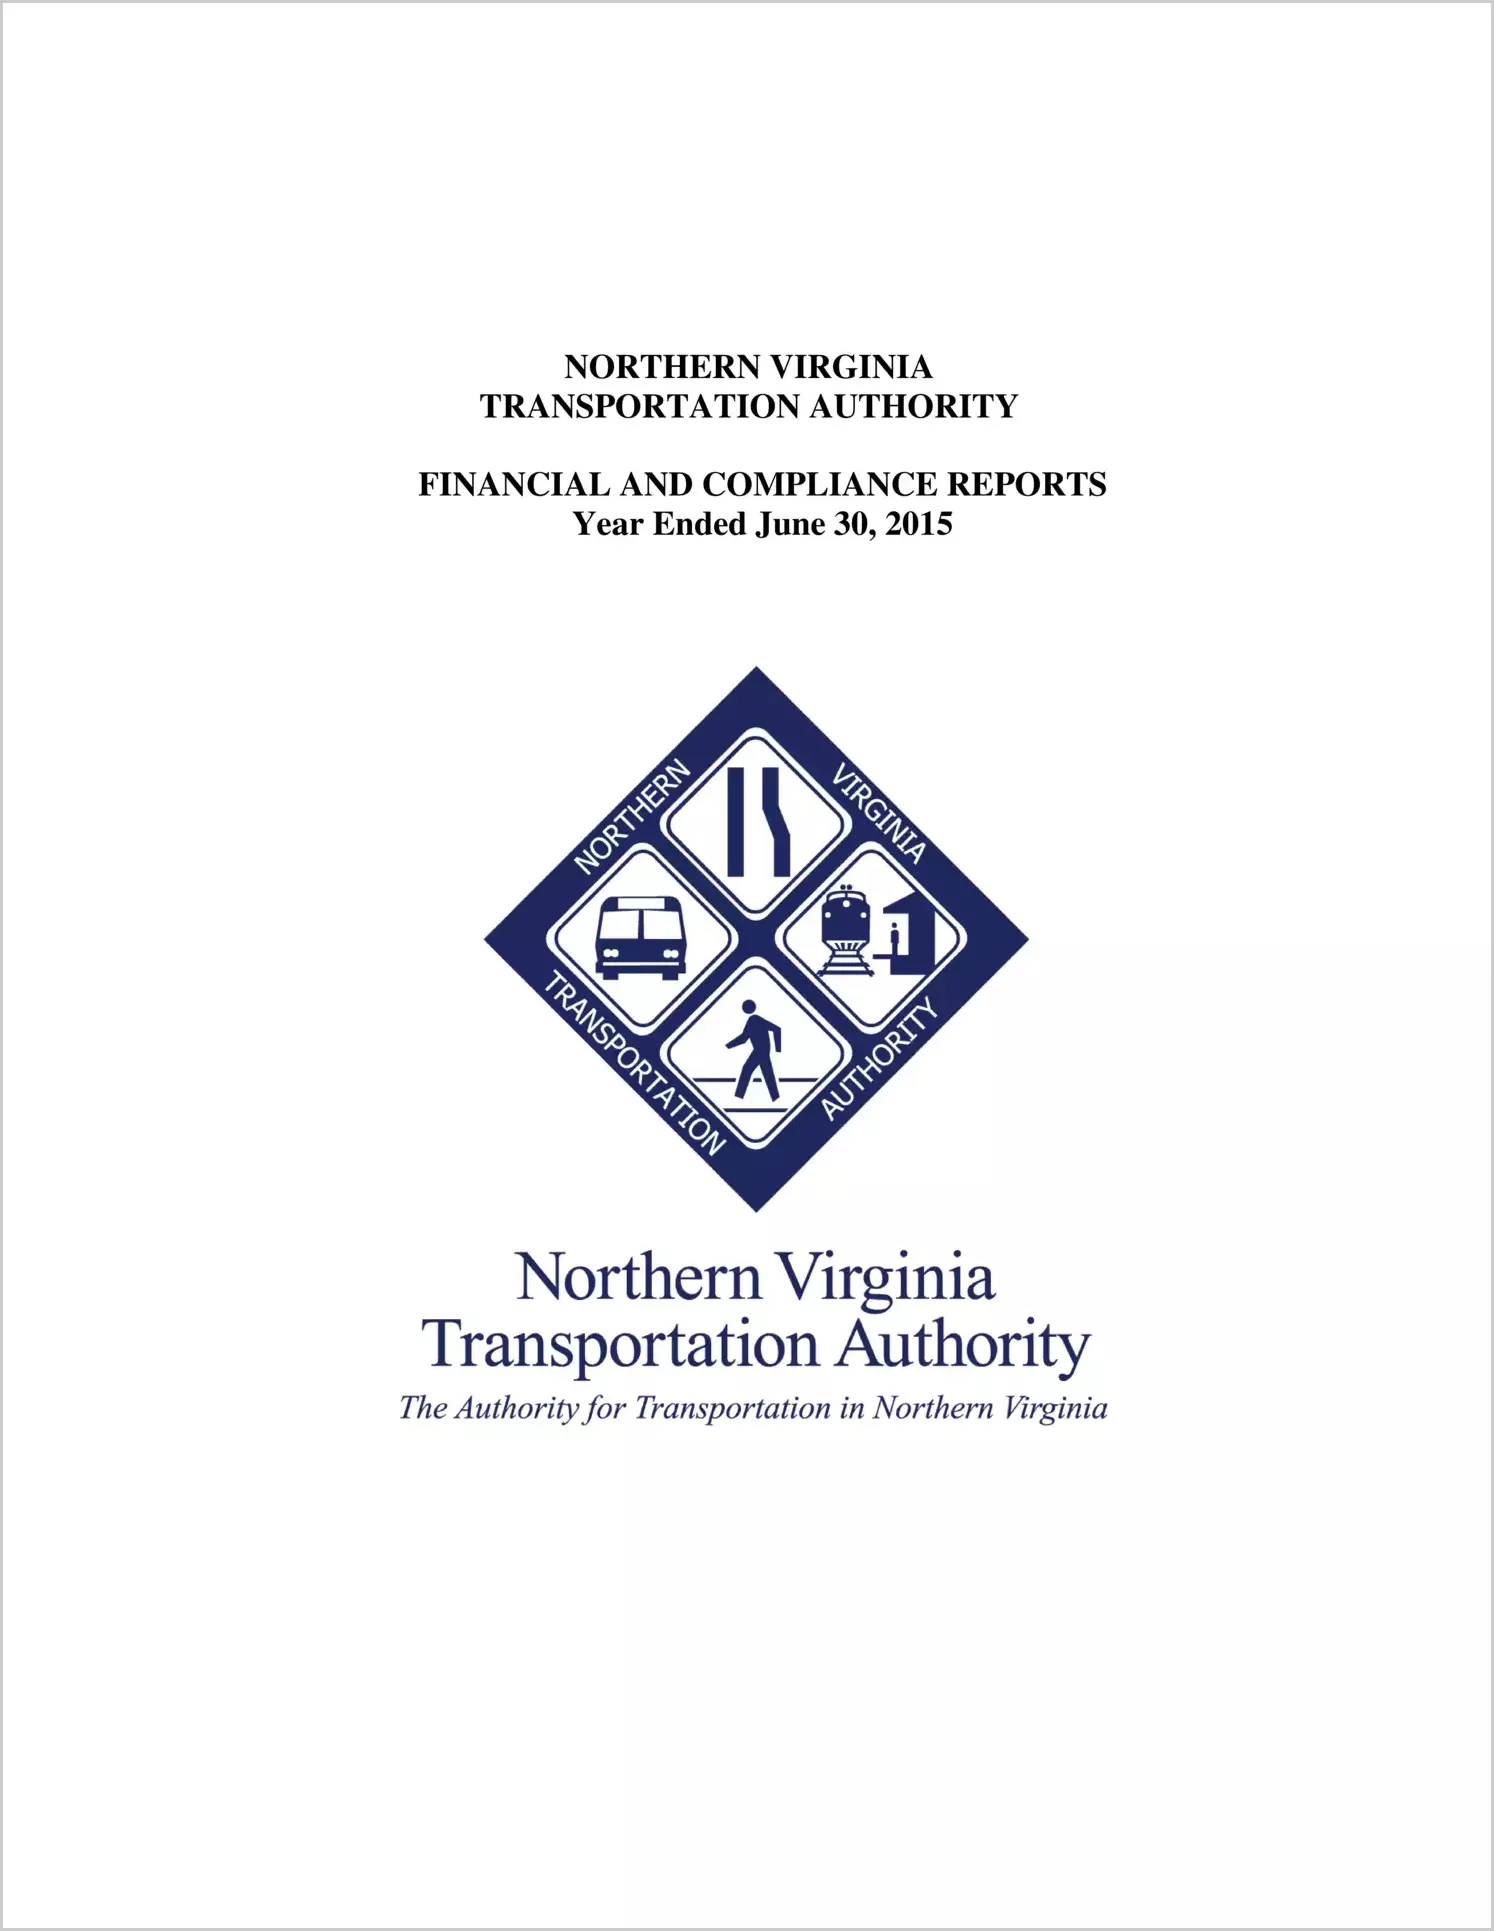 2015 ABC/Other Annual Financial Report  for Northern Virginia Transportation Authority